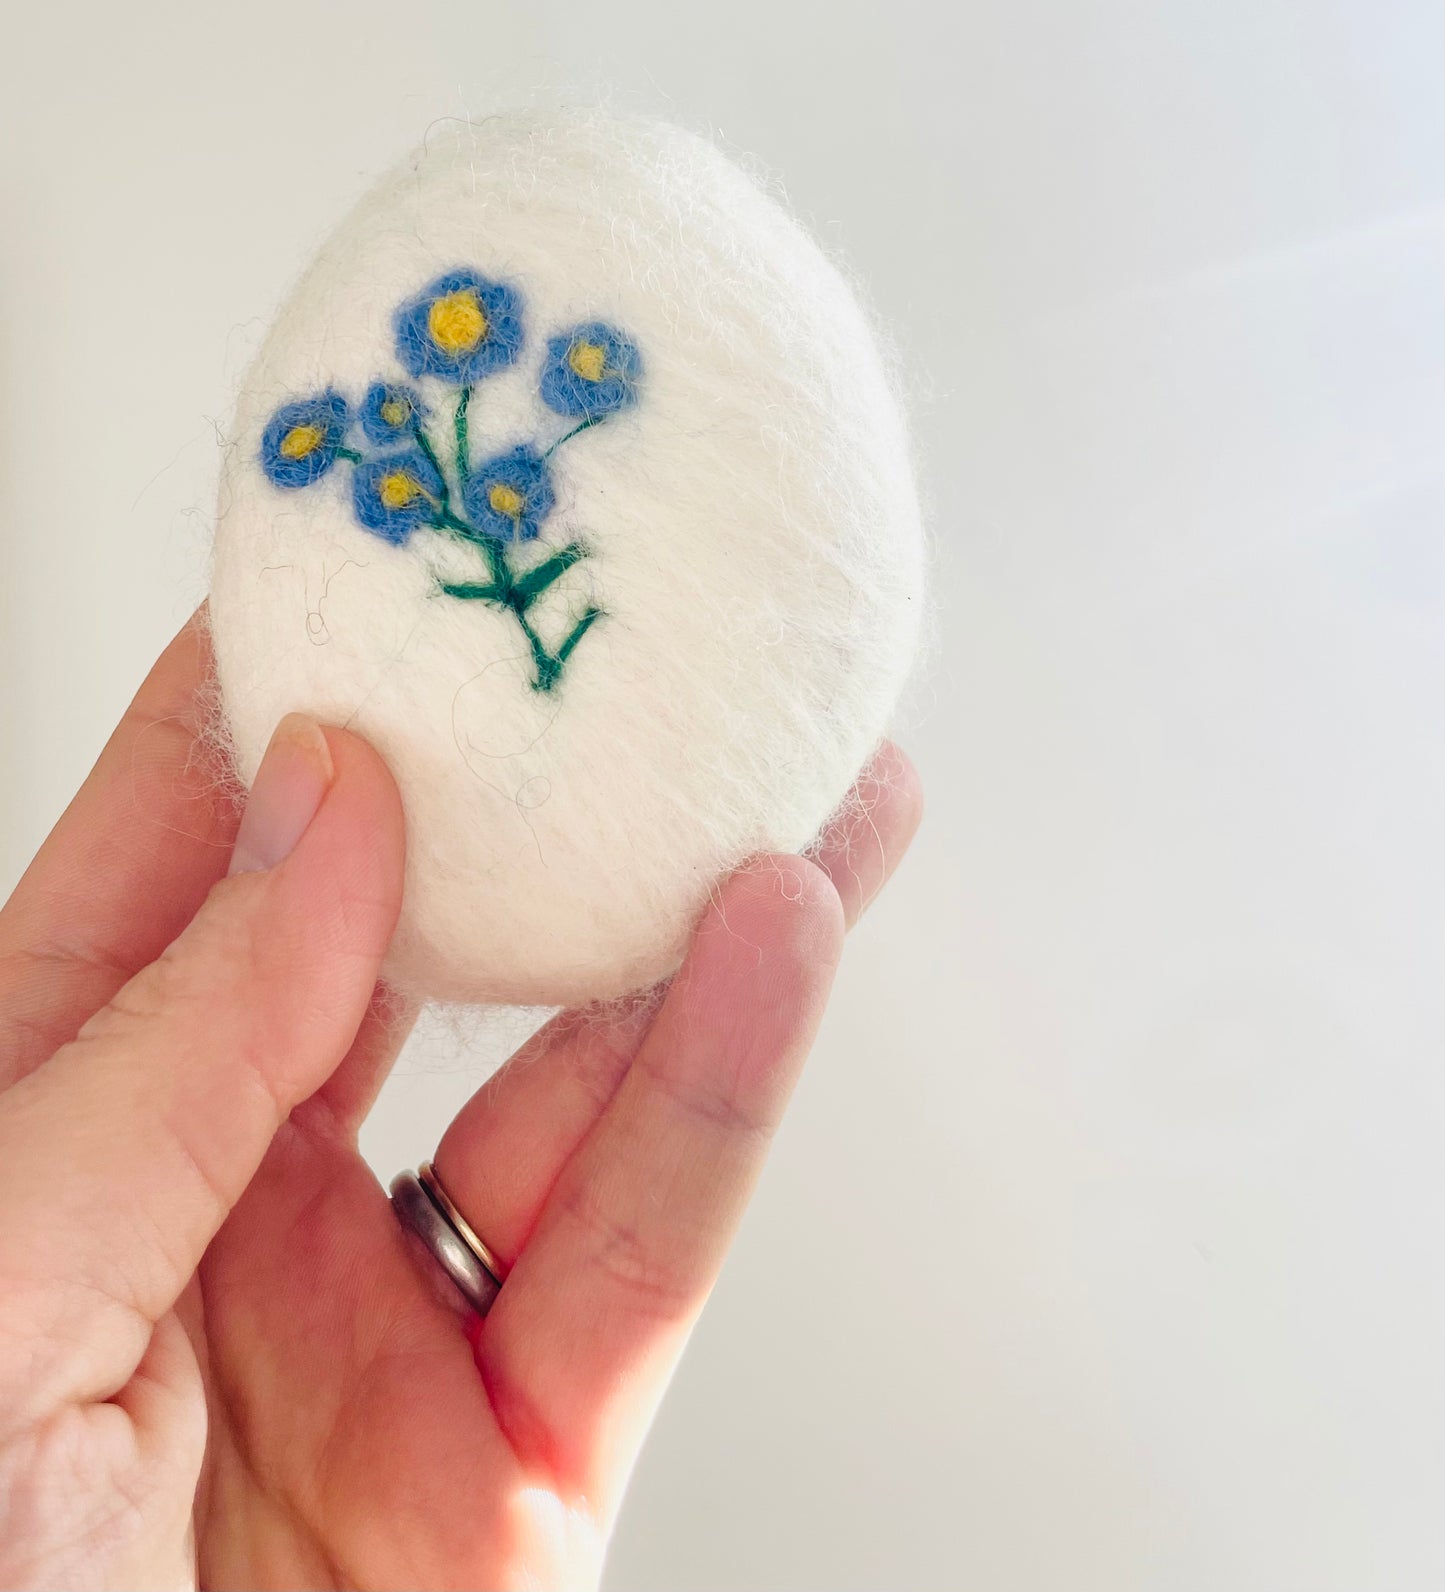 Forget me not felted soap